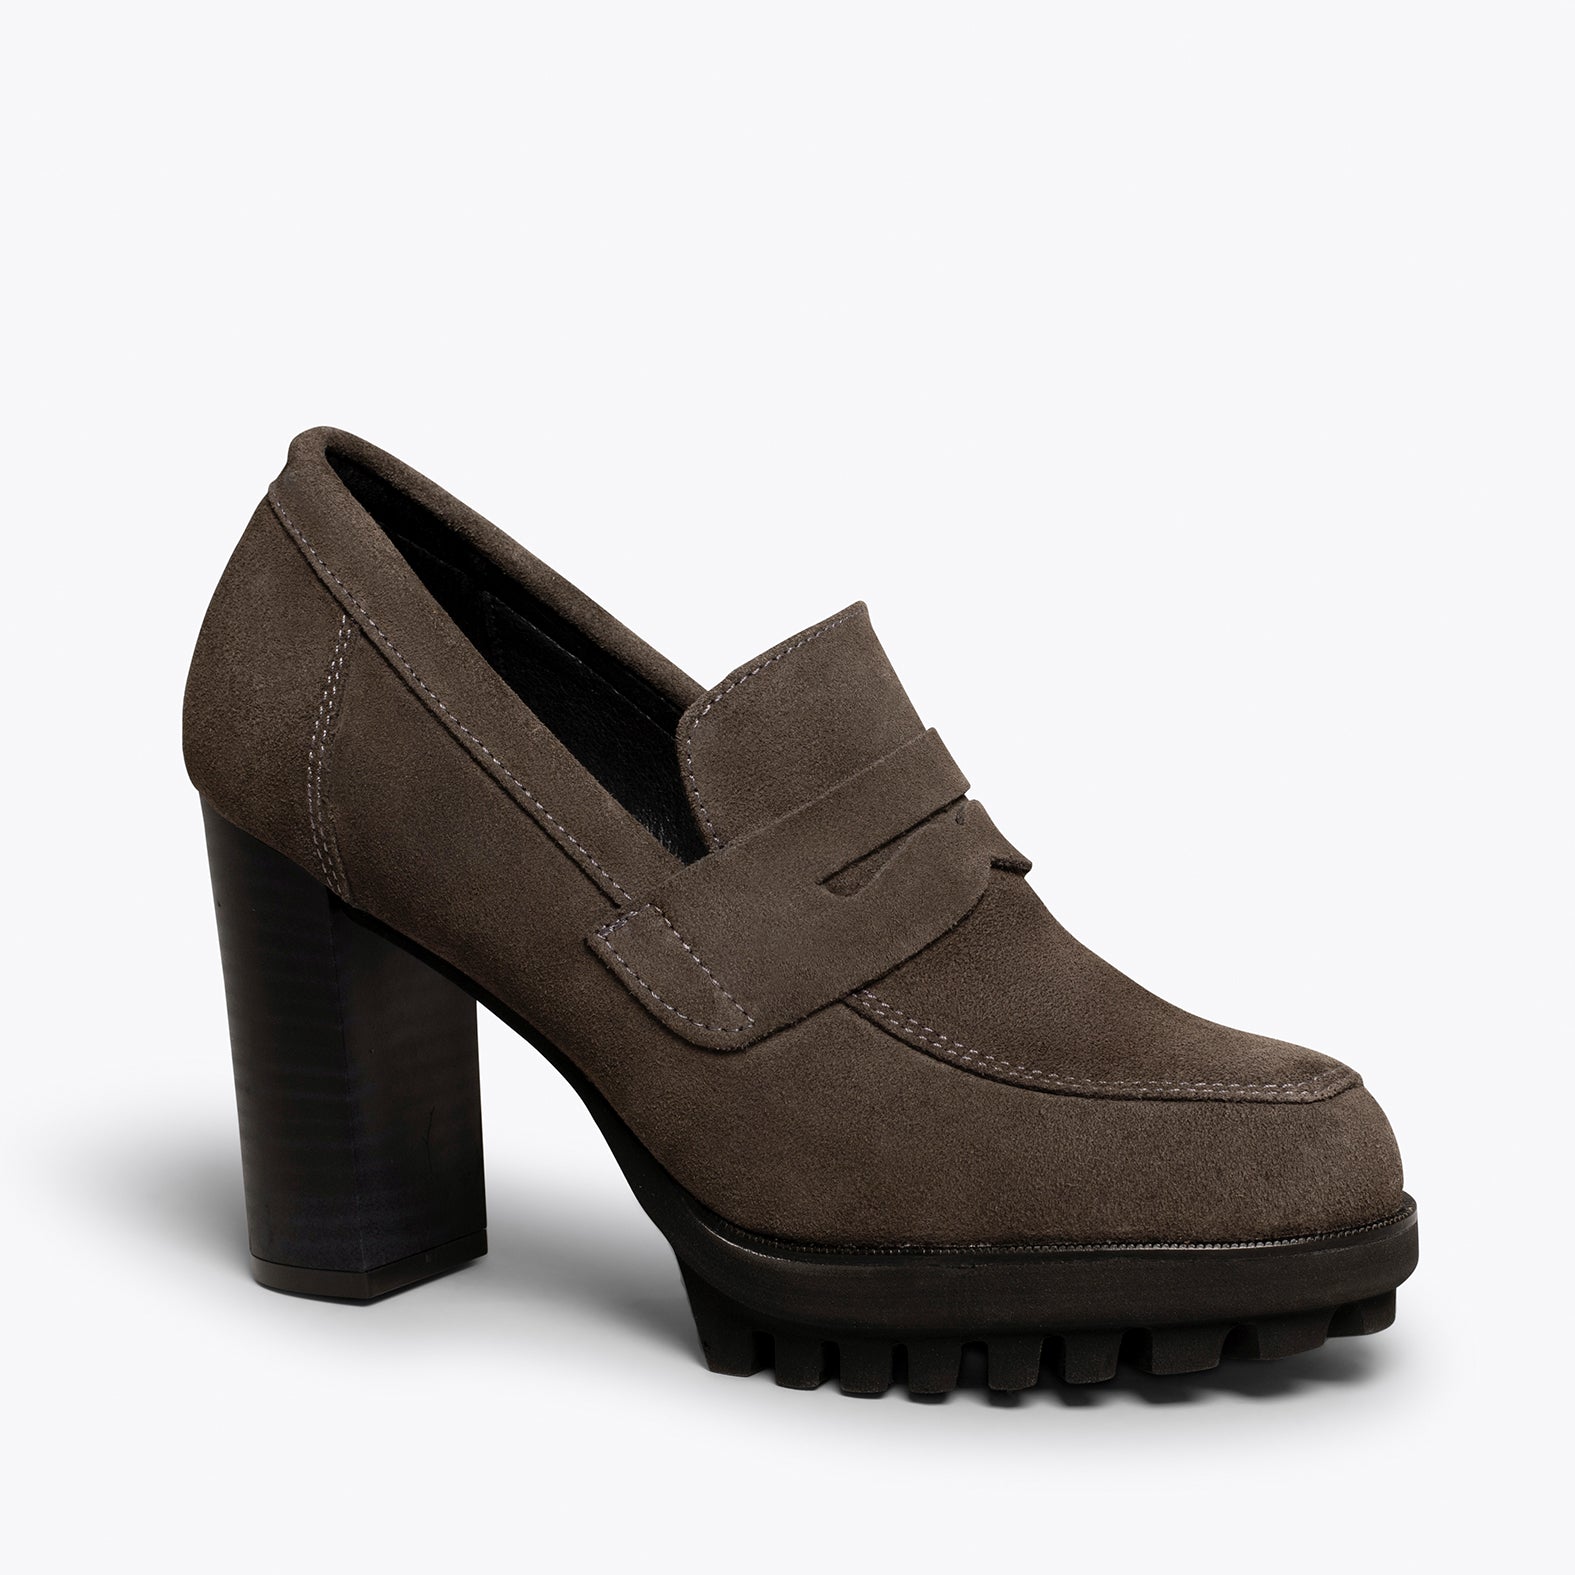 TREND – TAUPE high heel moccasin with platform